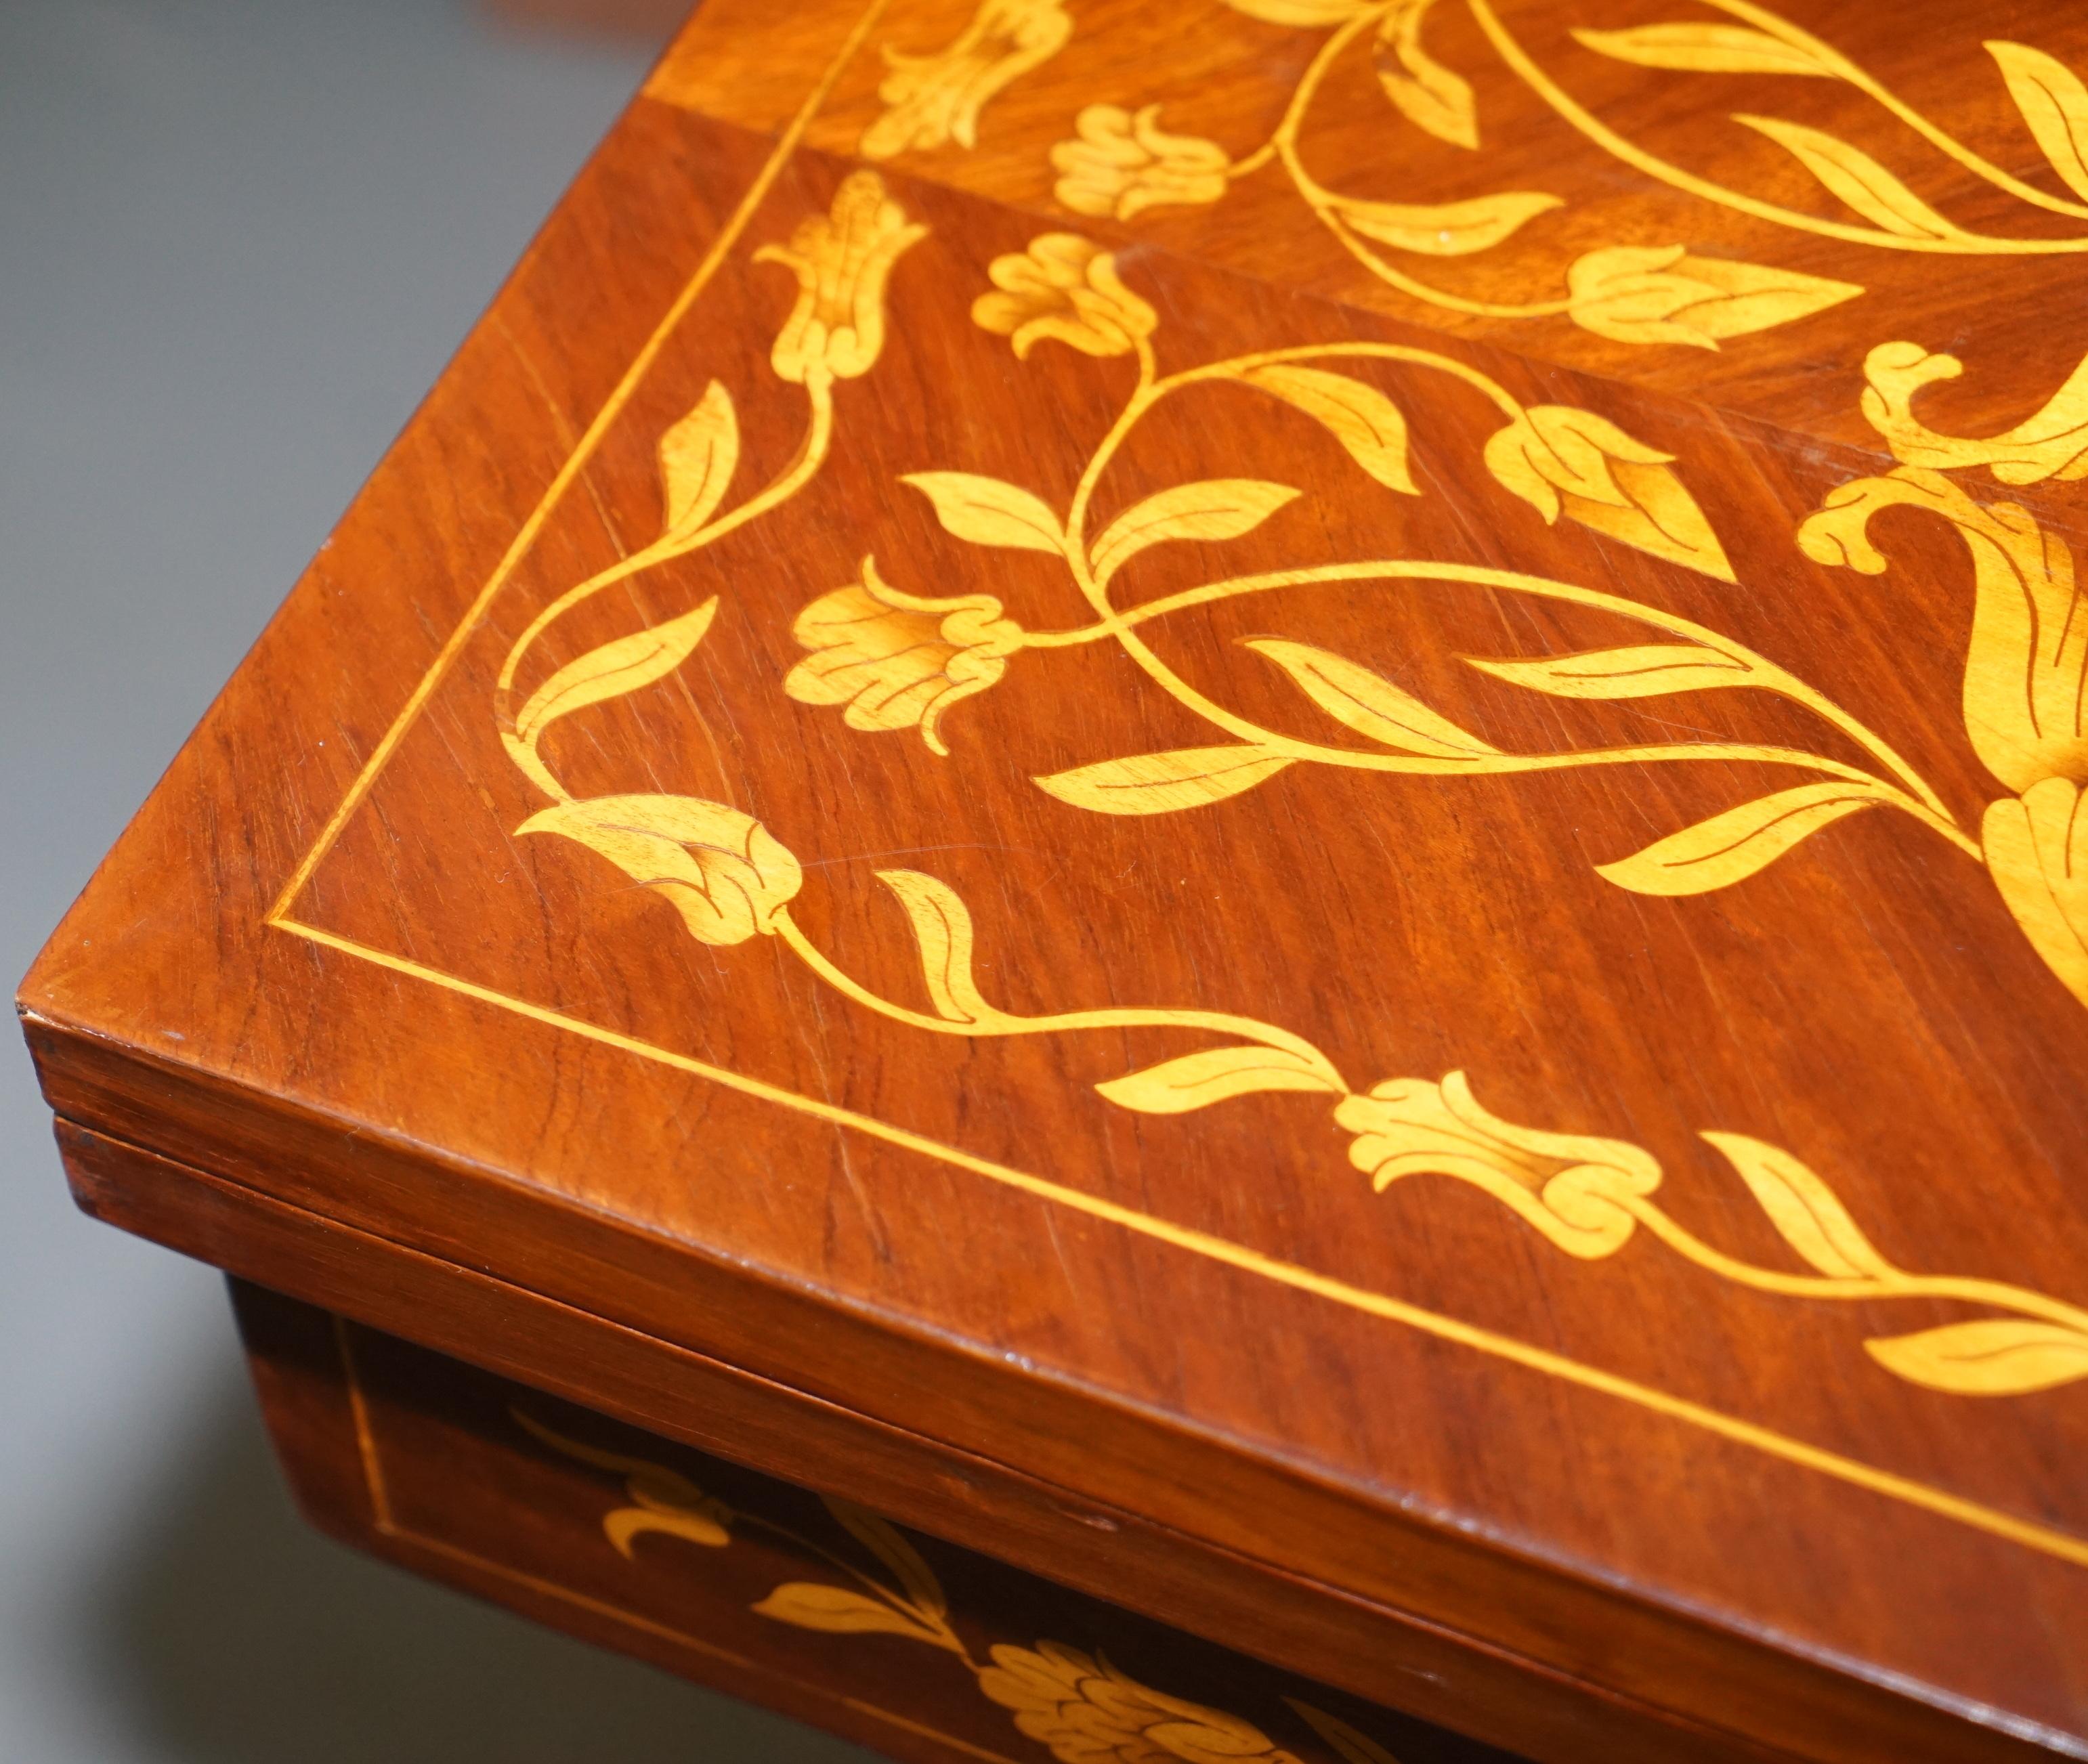 19th Century Sublime Antique Dutch Games Card Table with Chess Board Top Marquetry Inlaid